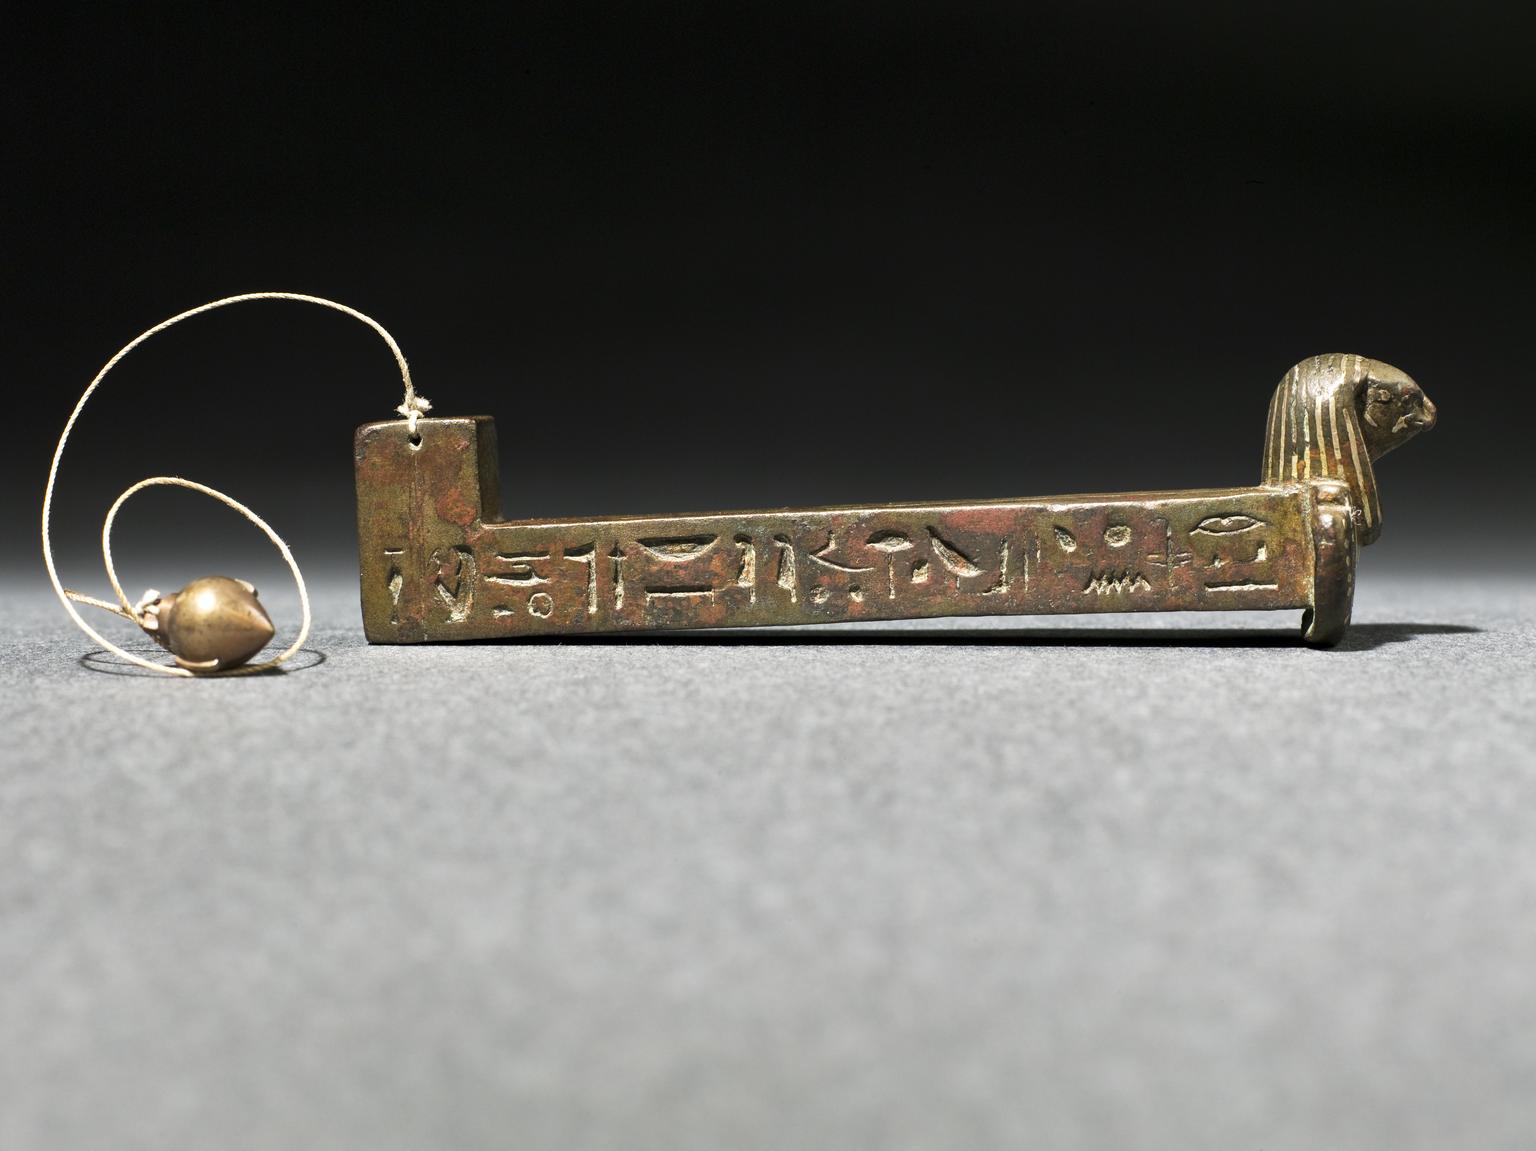 'Merkhet', Ancient Egyptian astronomical timekeeping instrument, bronze with hieroglyphic text inlaid with electum metal, fitted with replica plub bob, 600BCE.